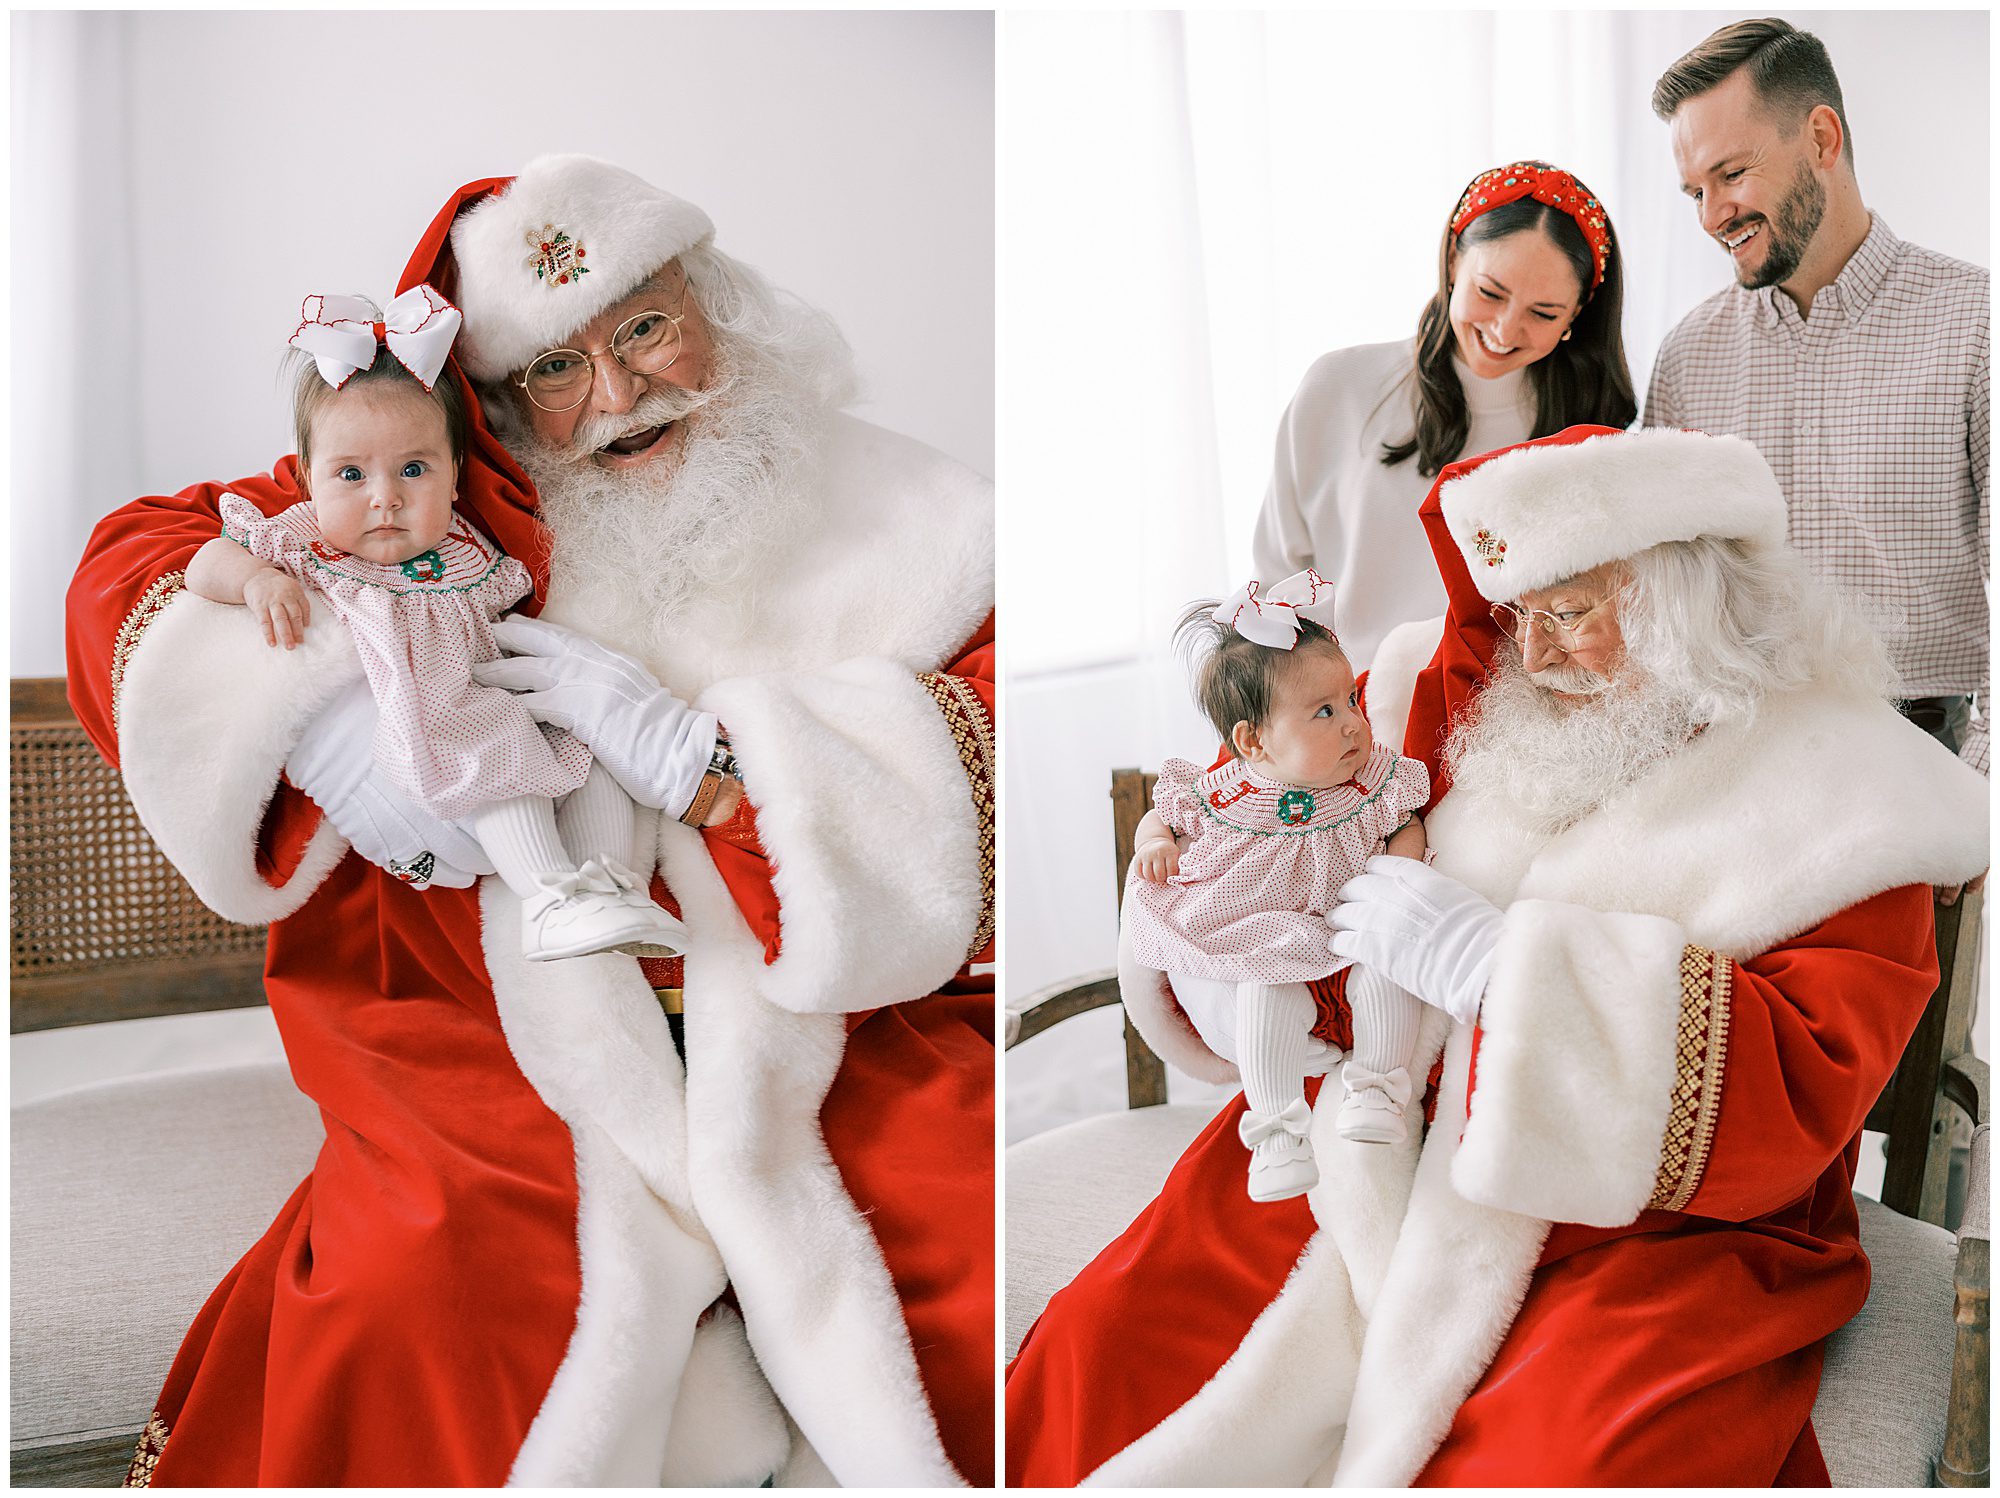 santa holding baby and whole family standing with santa